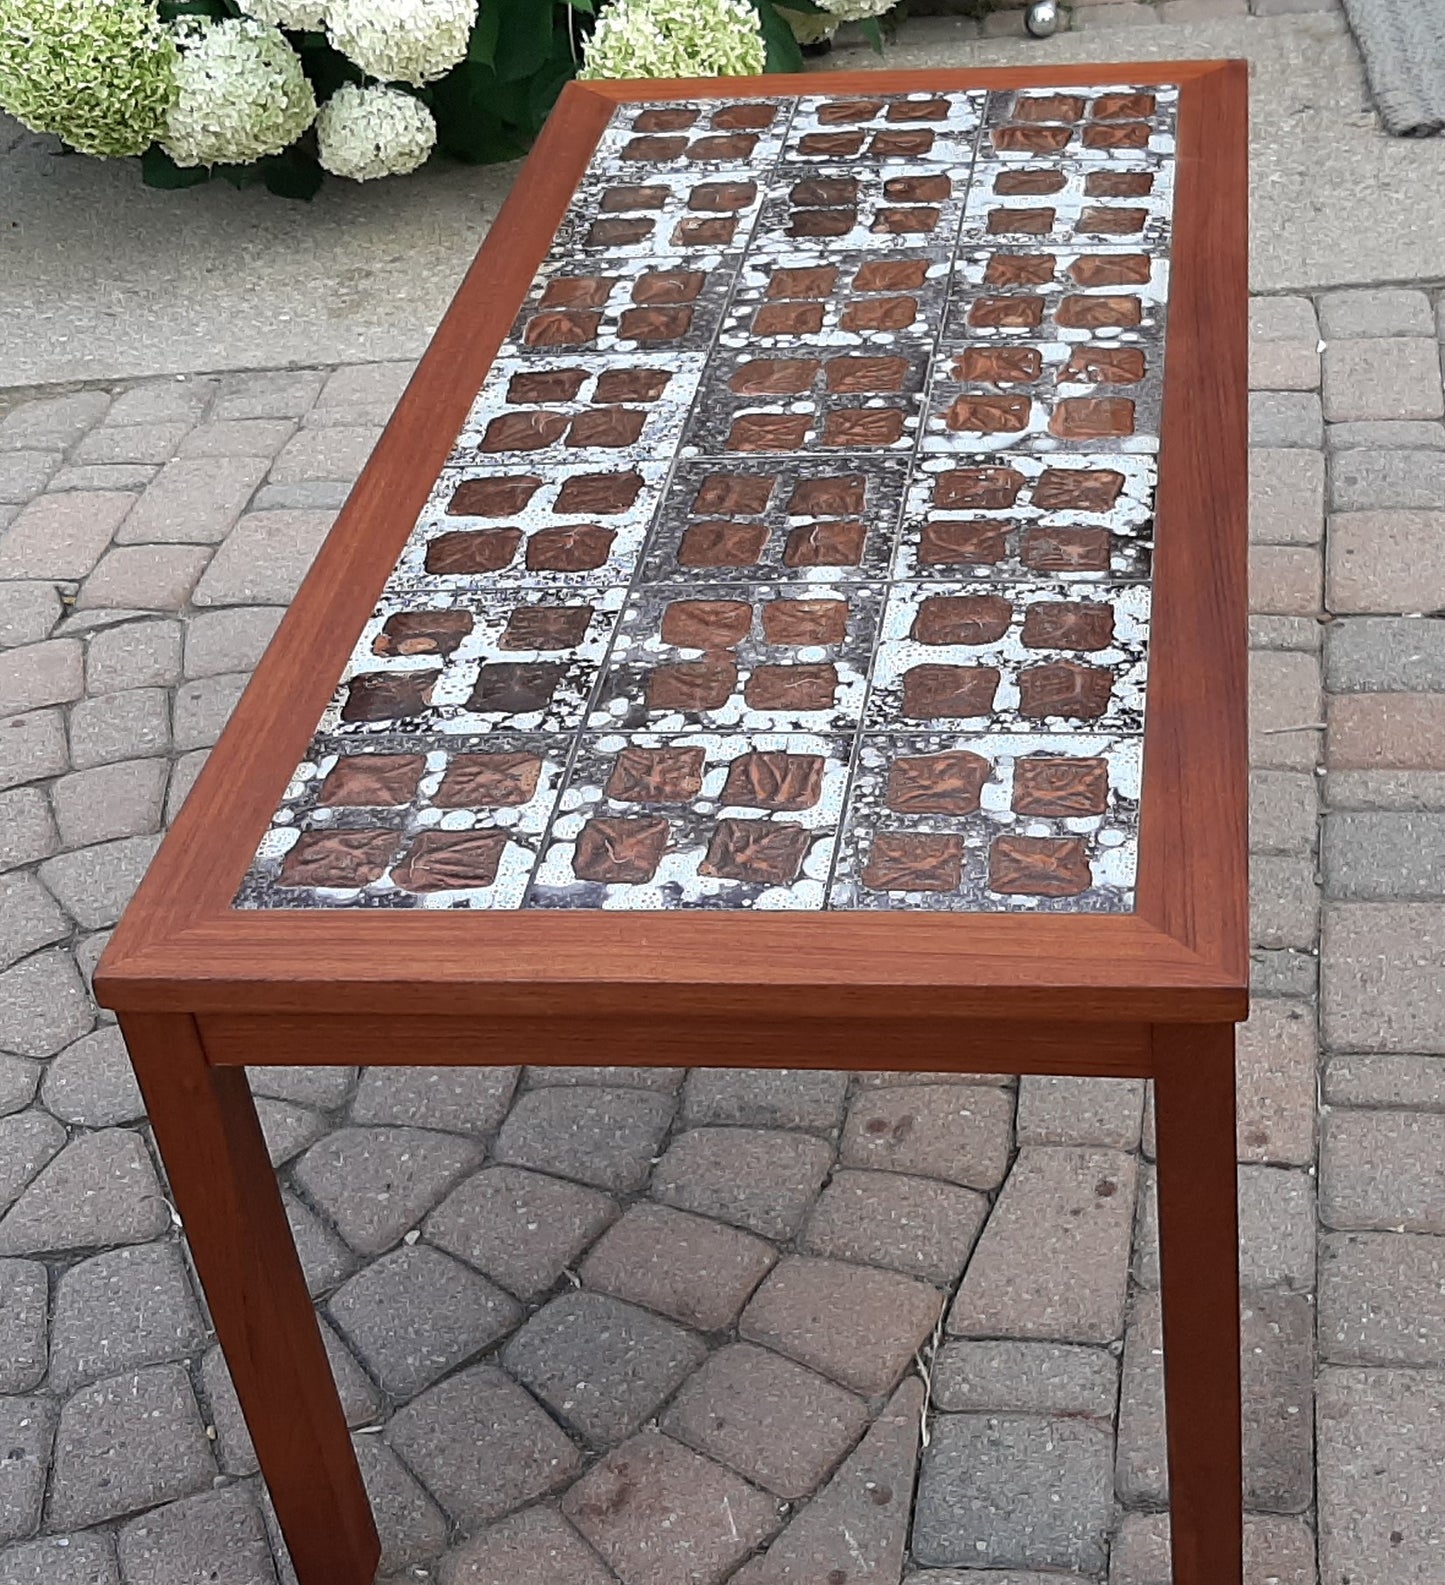 REFINISHED Danish MCM teak coffee table with tile inlay 47 x 22", PERFECT